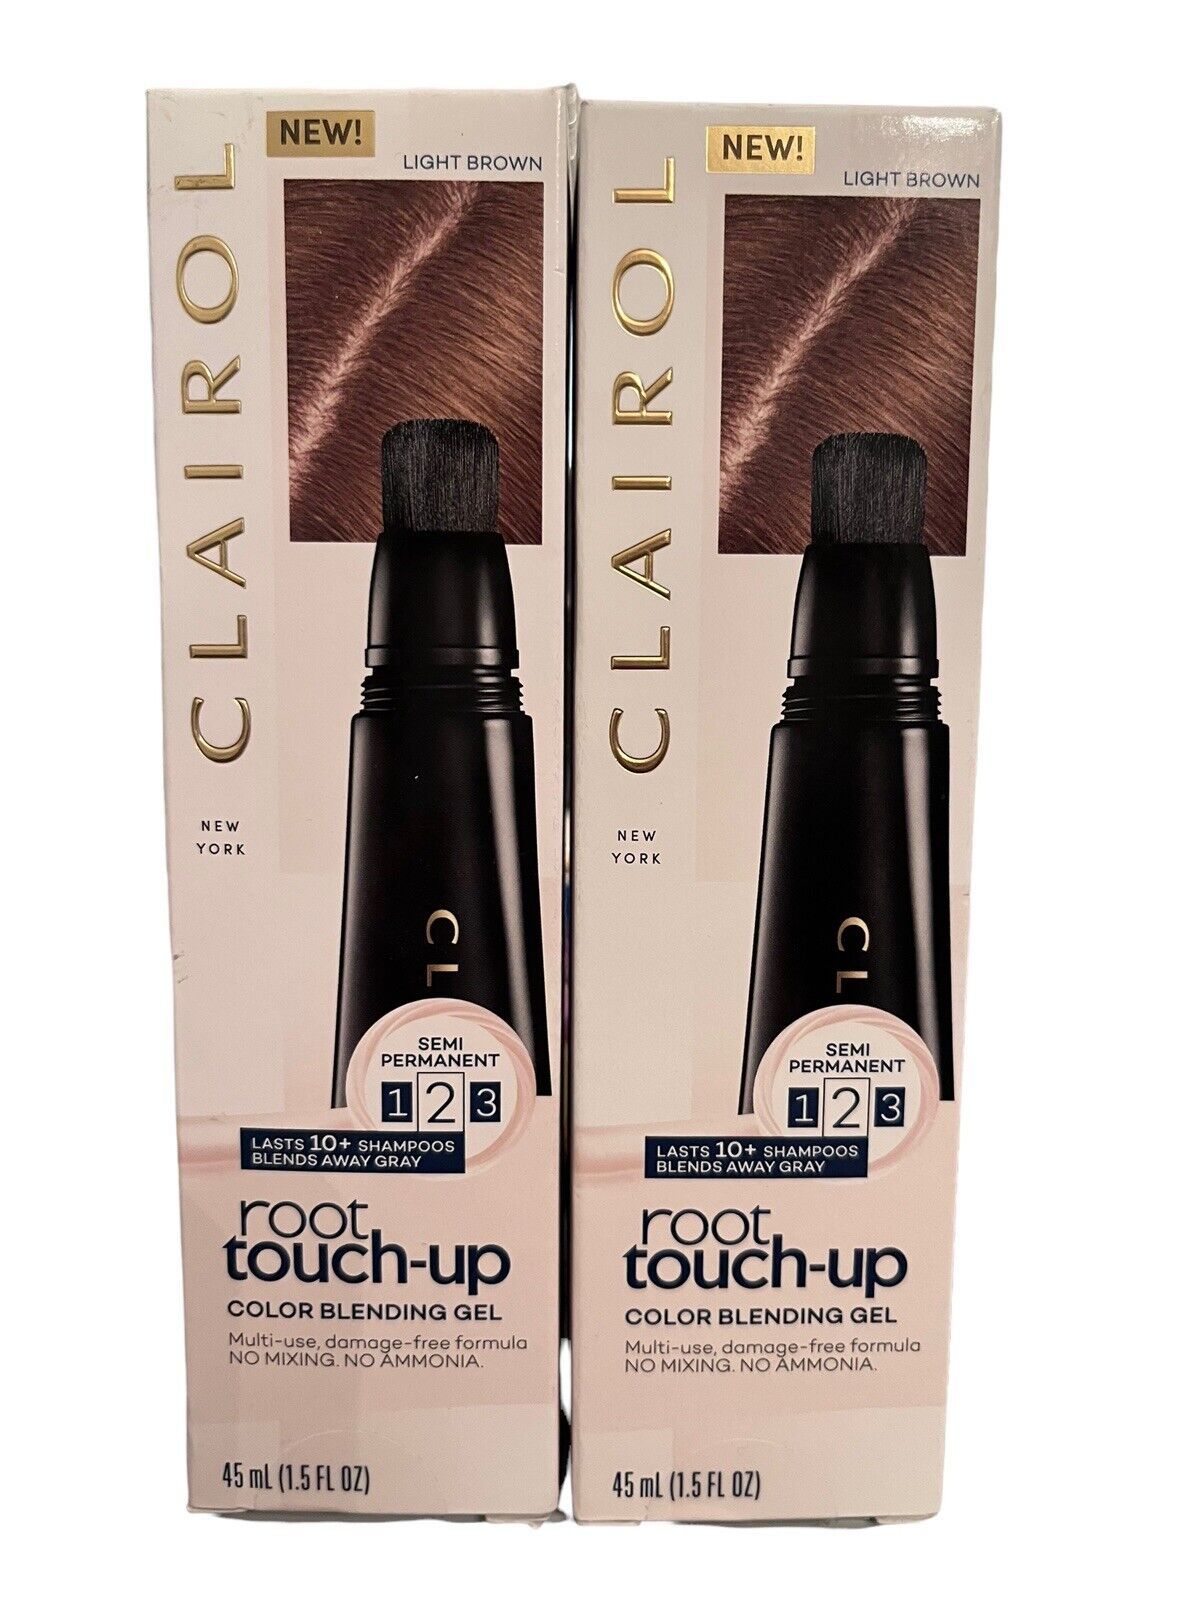 2 Clairol Root Touch Up Semi Permanent Color Blending Gel Light Brown 1.5 Fl Oz - $14.84